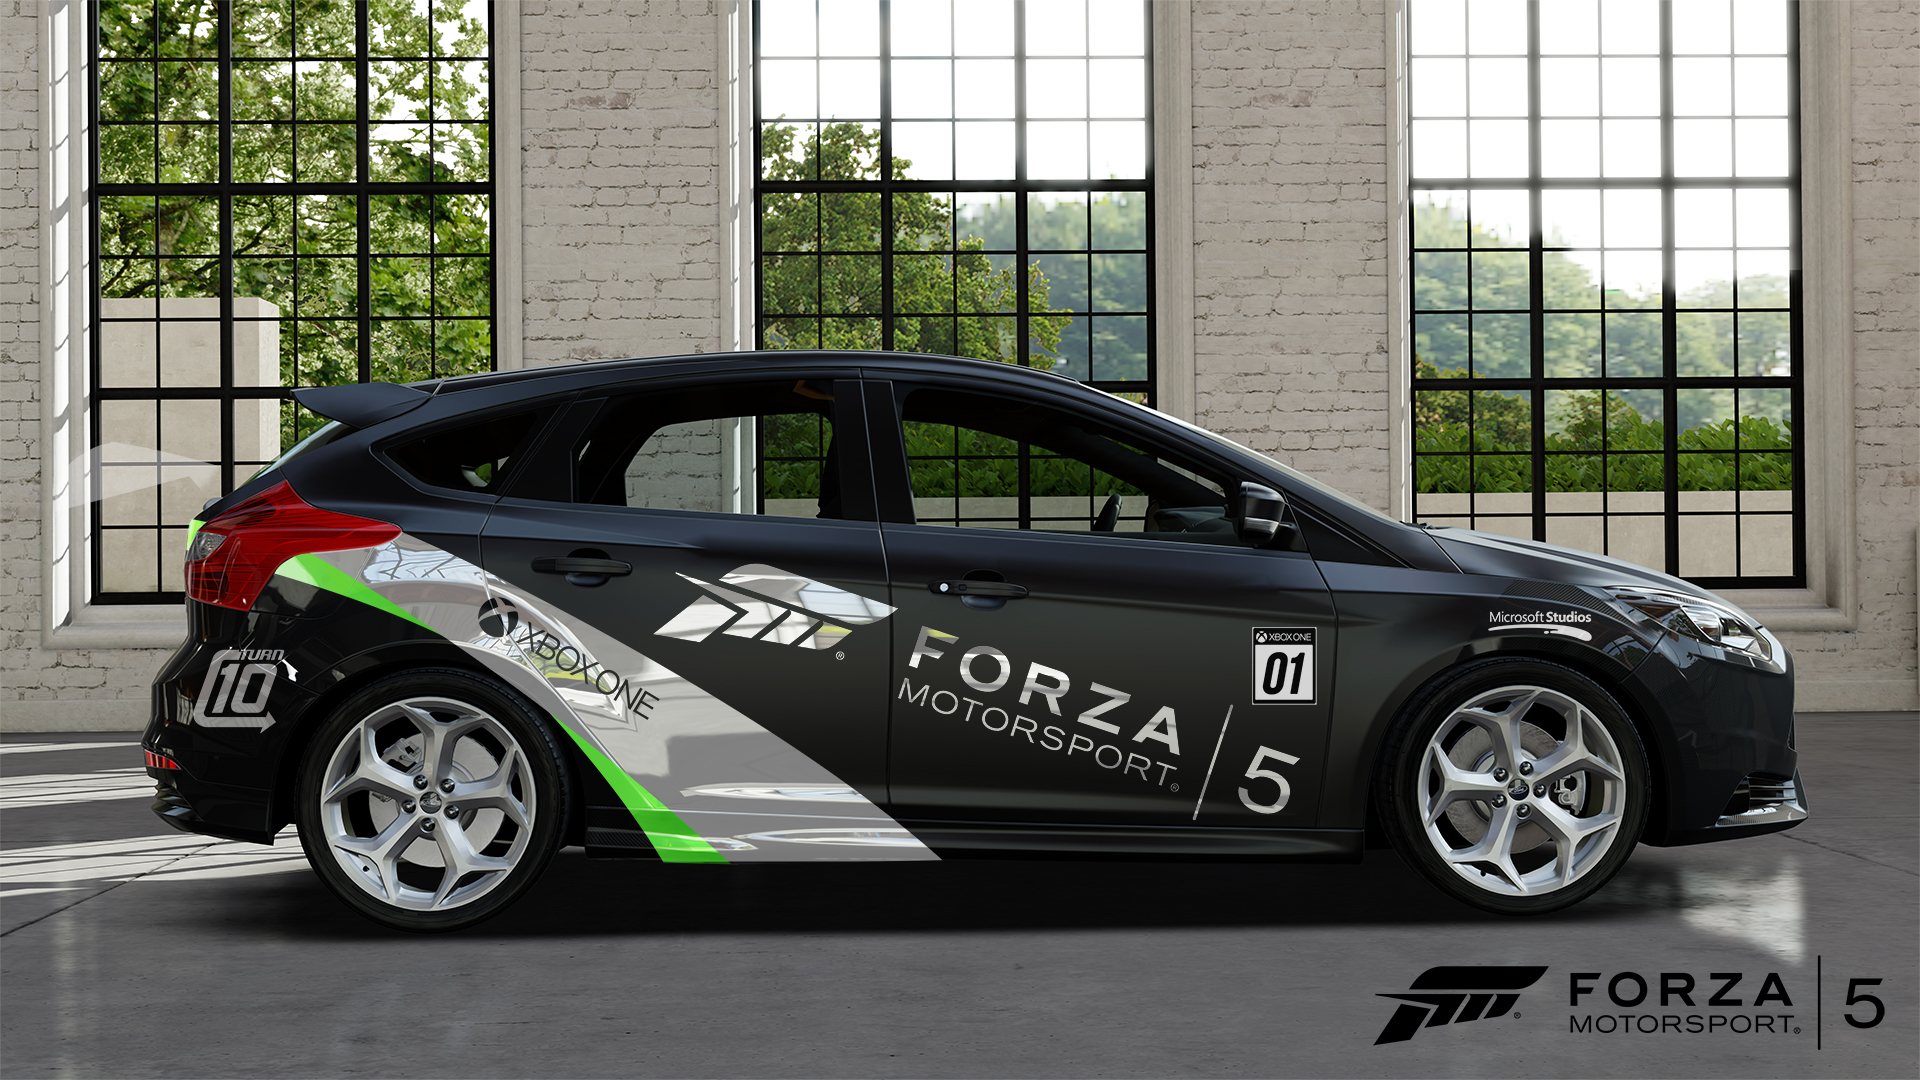 Forza Motorsport 5 Limited Edition - Xbox Wire